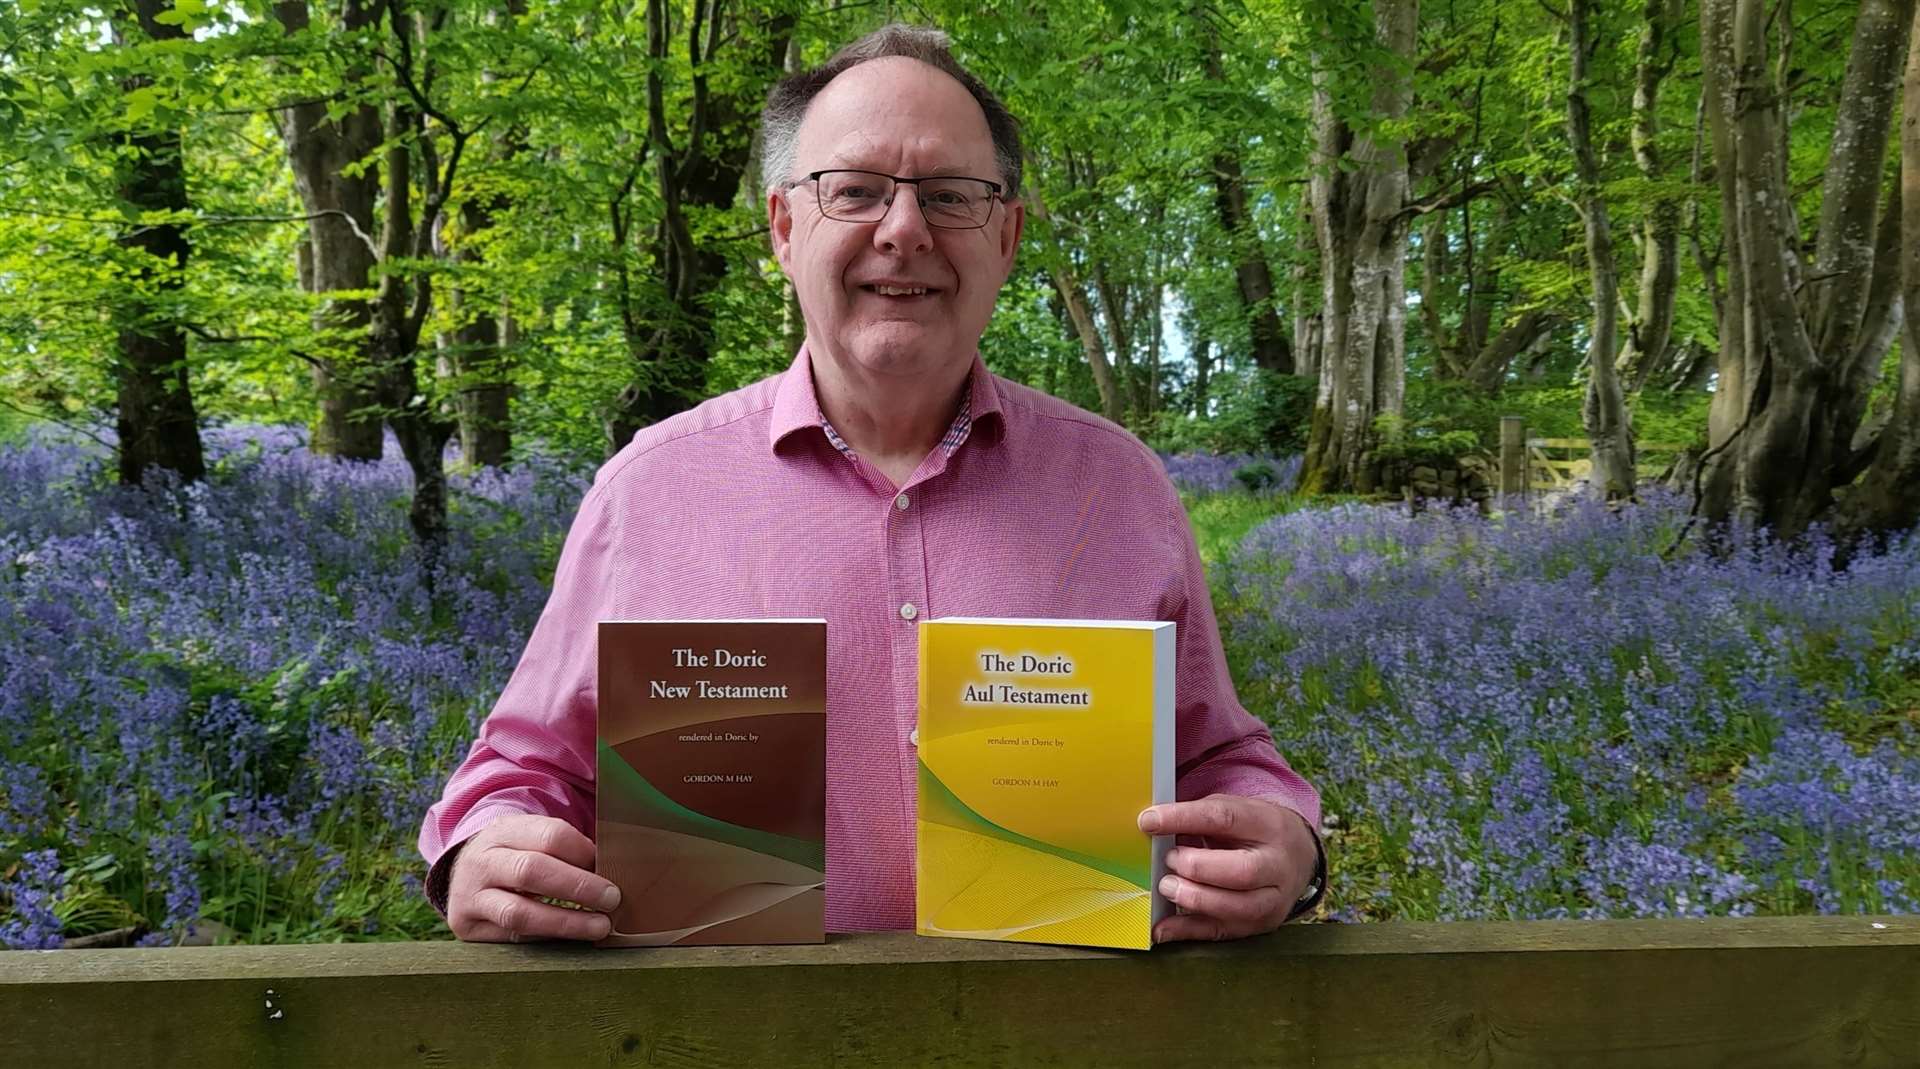 Gordon Hay has complted his translation of the bible into Doric